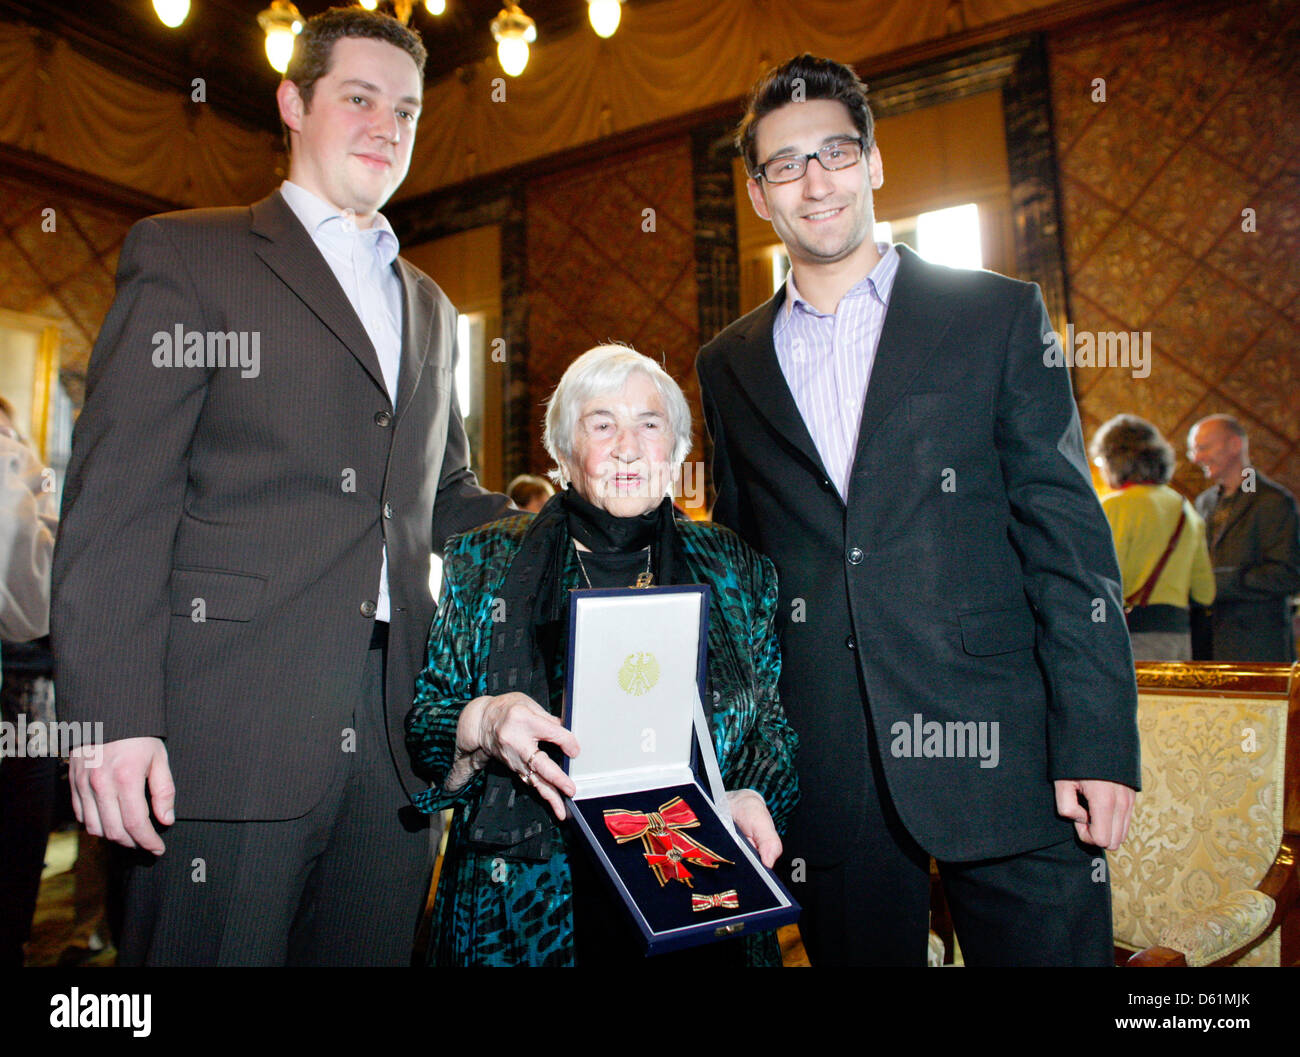 Esther Bejarano is pictured with her Great Federal Cross of Merit and her grown-up grandsons Jonathan Bejarano (L) and Anton Saefkow at the city hall in Hamburg, Germany, 26 April 2012. Mayor of Hamburg Olaf Scholz awarded her the Great Federal Cross of Merit. Bejarano is one of the last survivors of the girls' orchestra of Auschwitz. Photo: DANIEL BOCKWOLDT Stock Photo